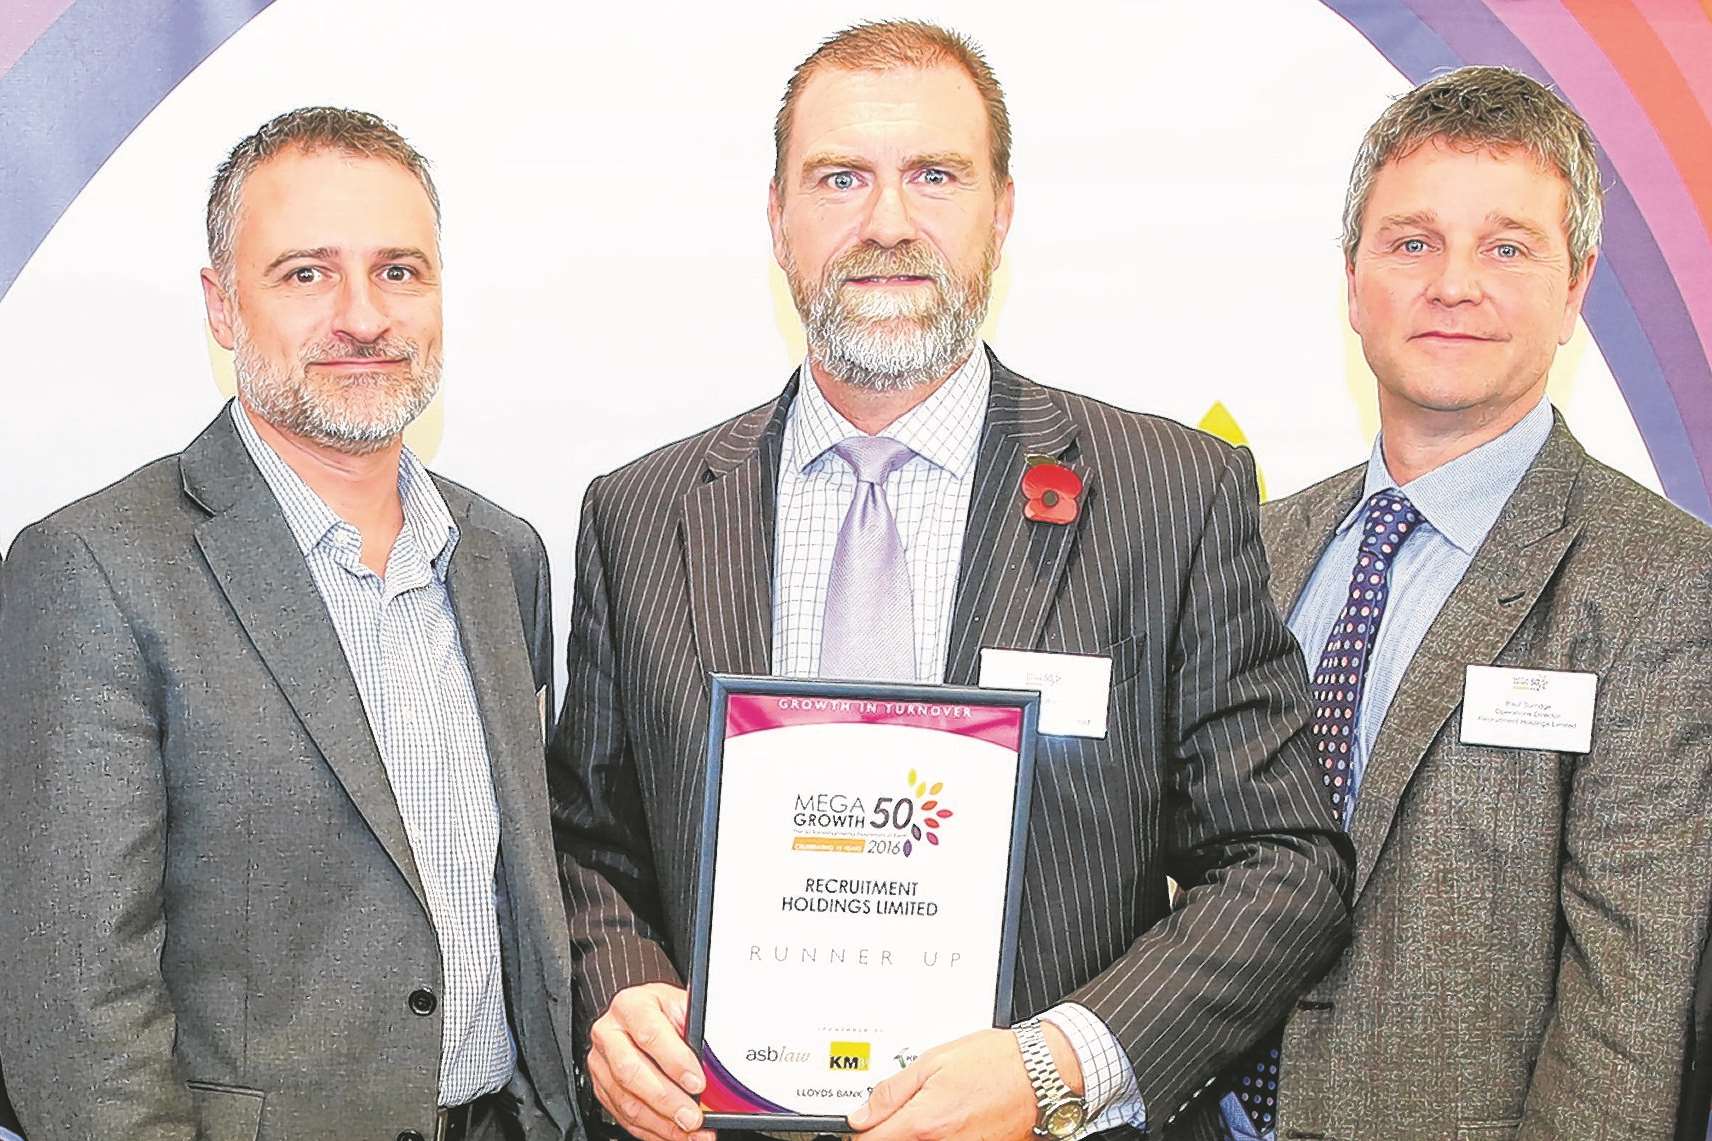 From left, RHL sales director Ian Hargrave, managing director Greg Wall and operations director Paul Surridge